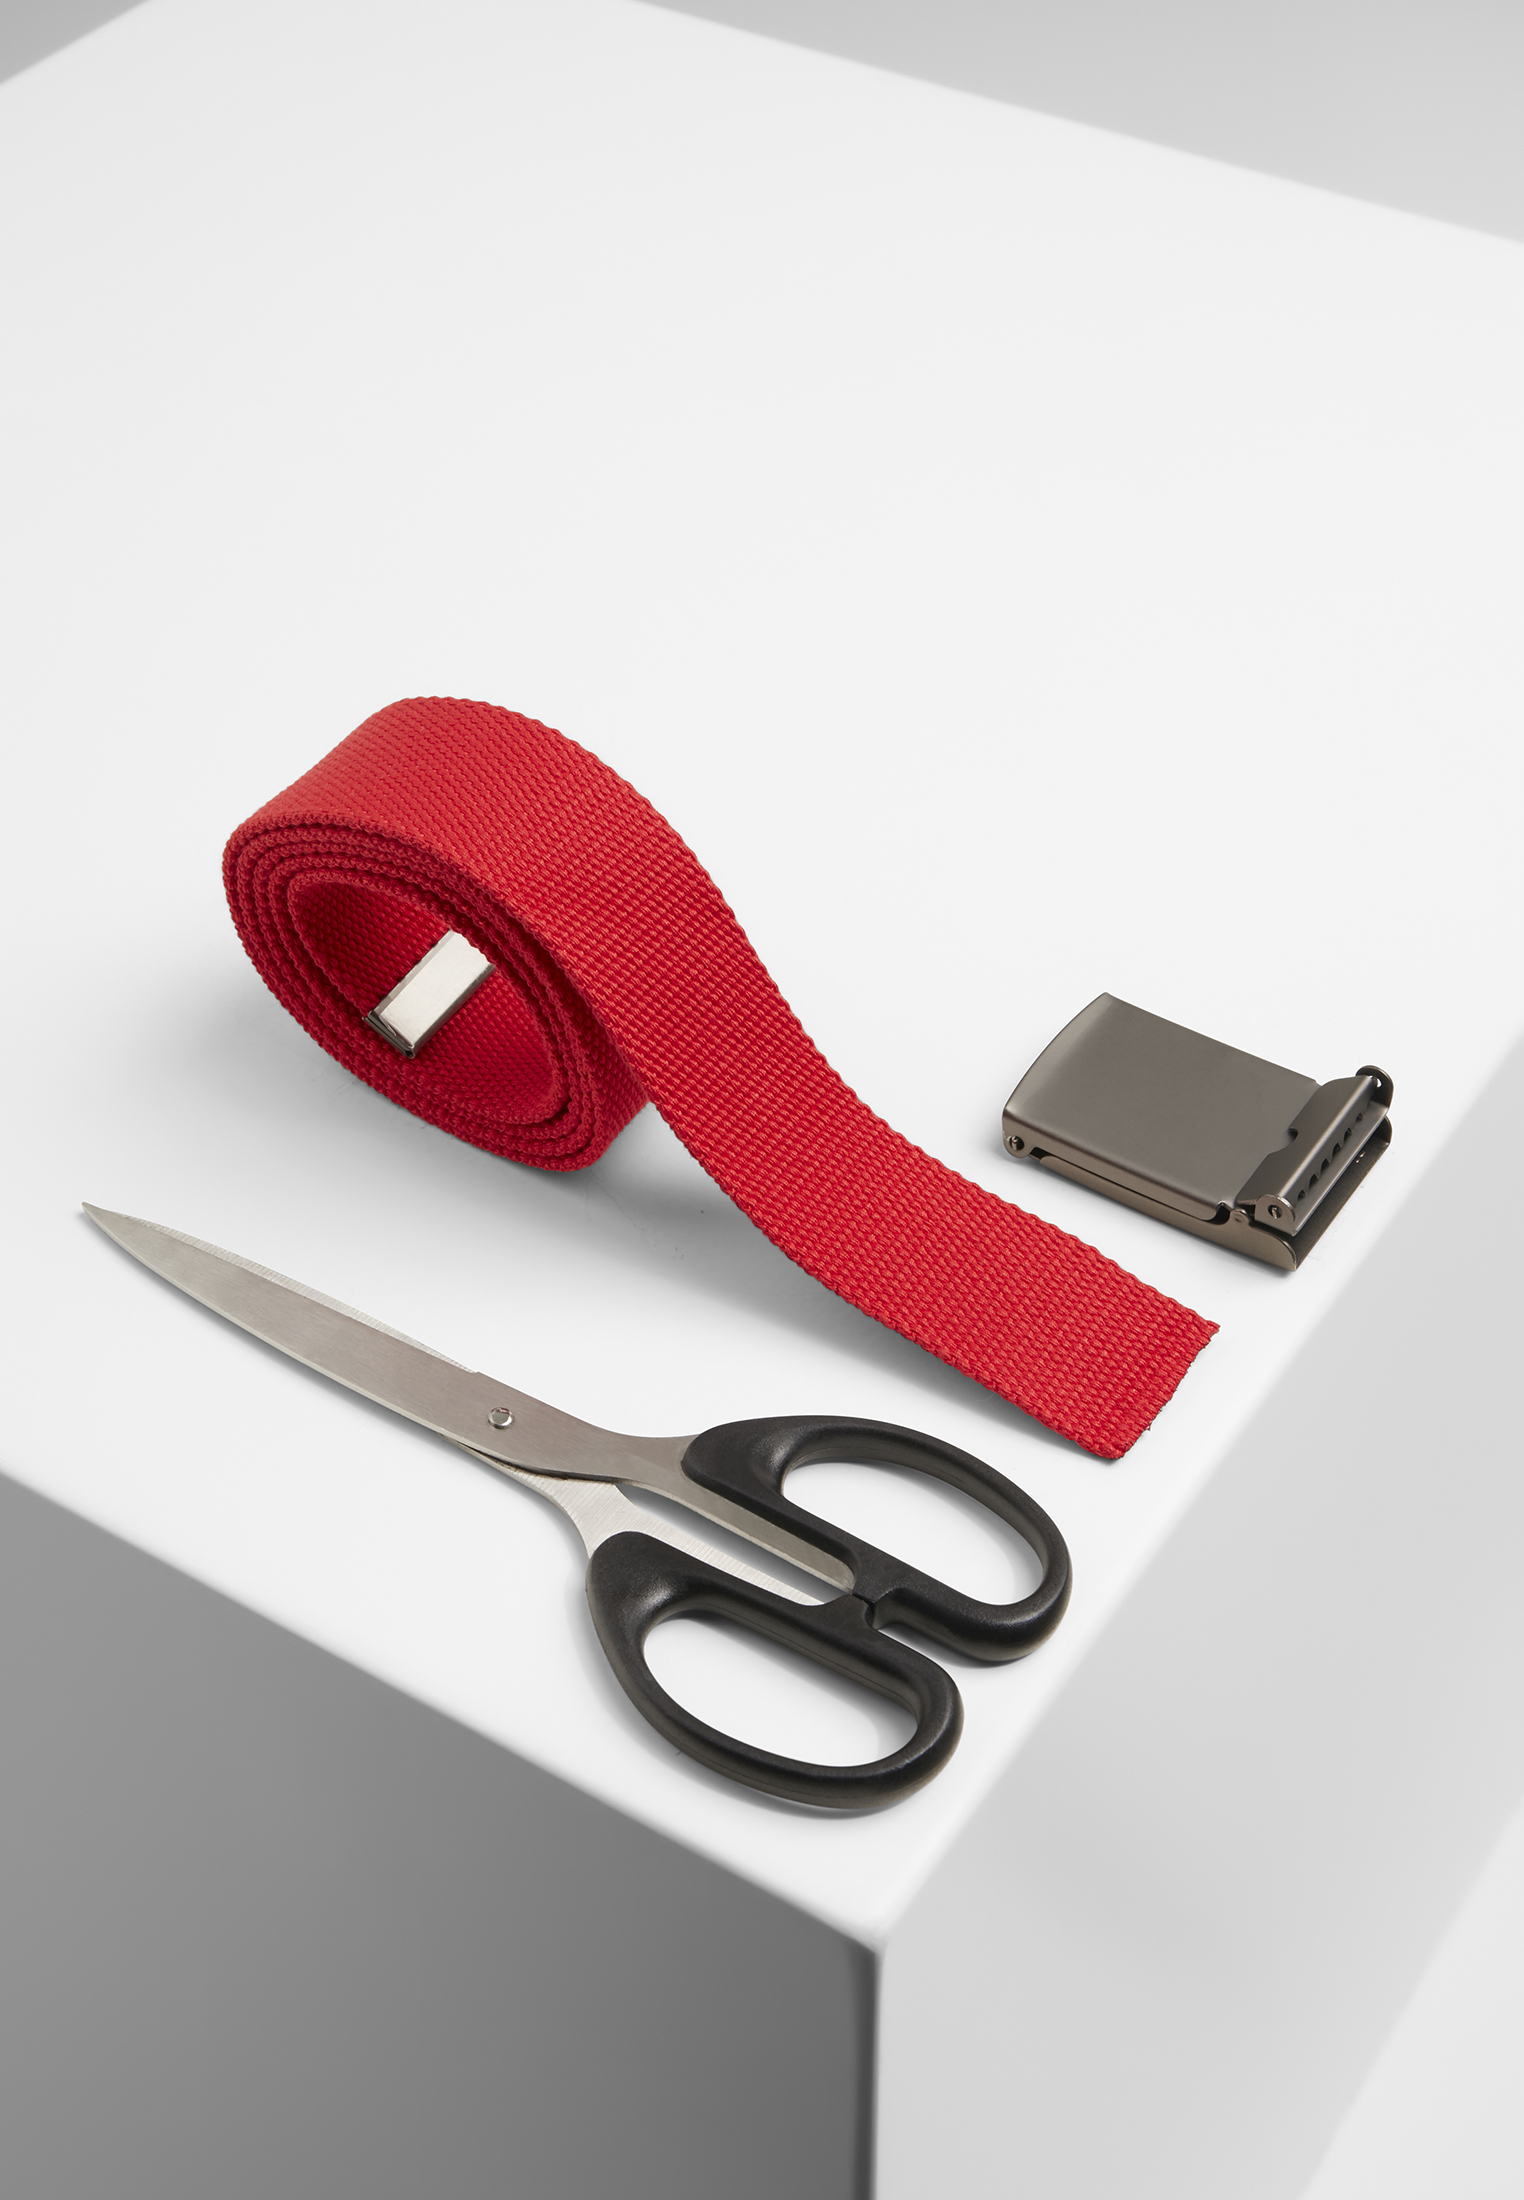 G?rtel Canvas Belts in Farbe red